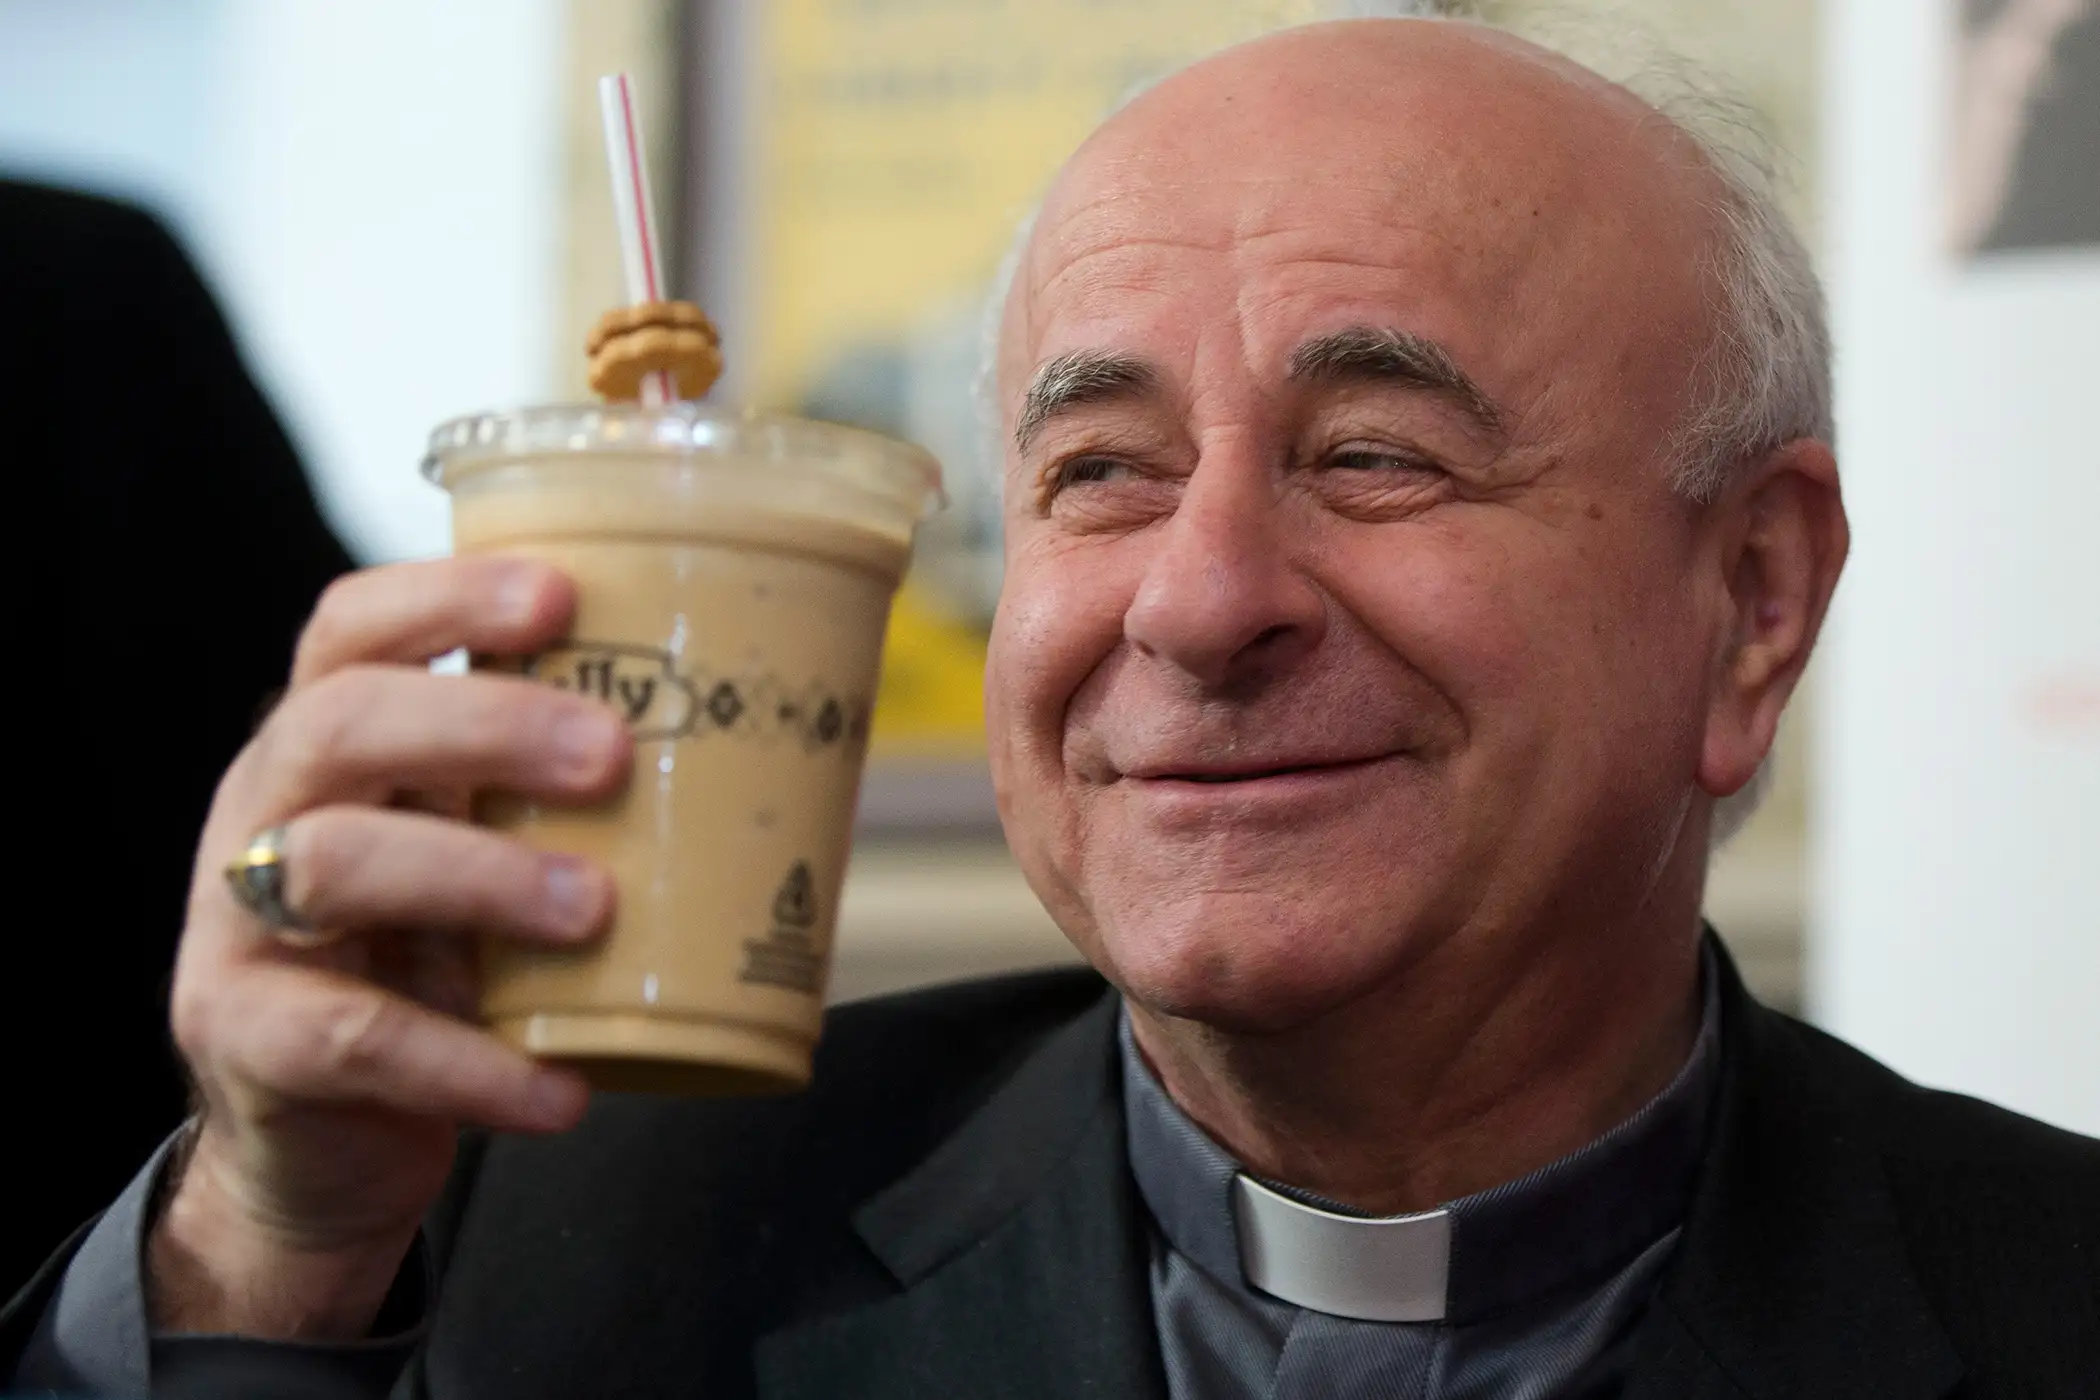 Archbishop Vincenzo Paglia lifts a milkshake during a news conference to pick a milkshake for the upcoming World Meeting of Families, Monday, March 9, 2015, at a Potbelly Sandwich Shop in Philadelphia.